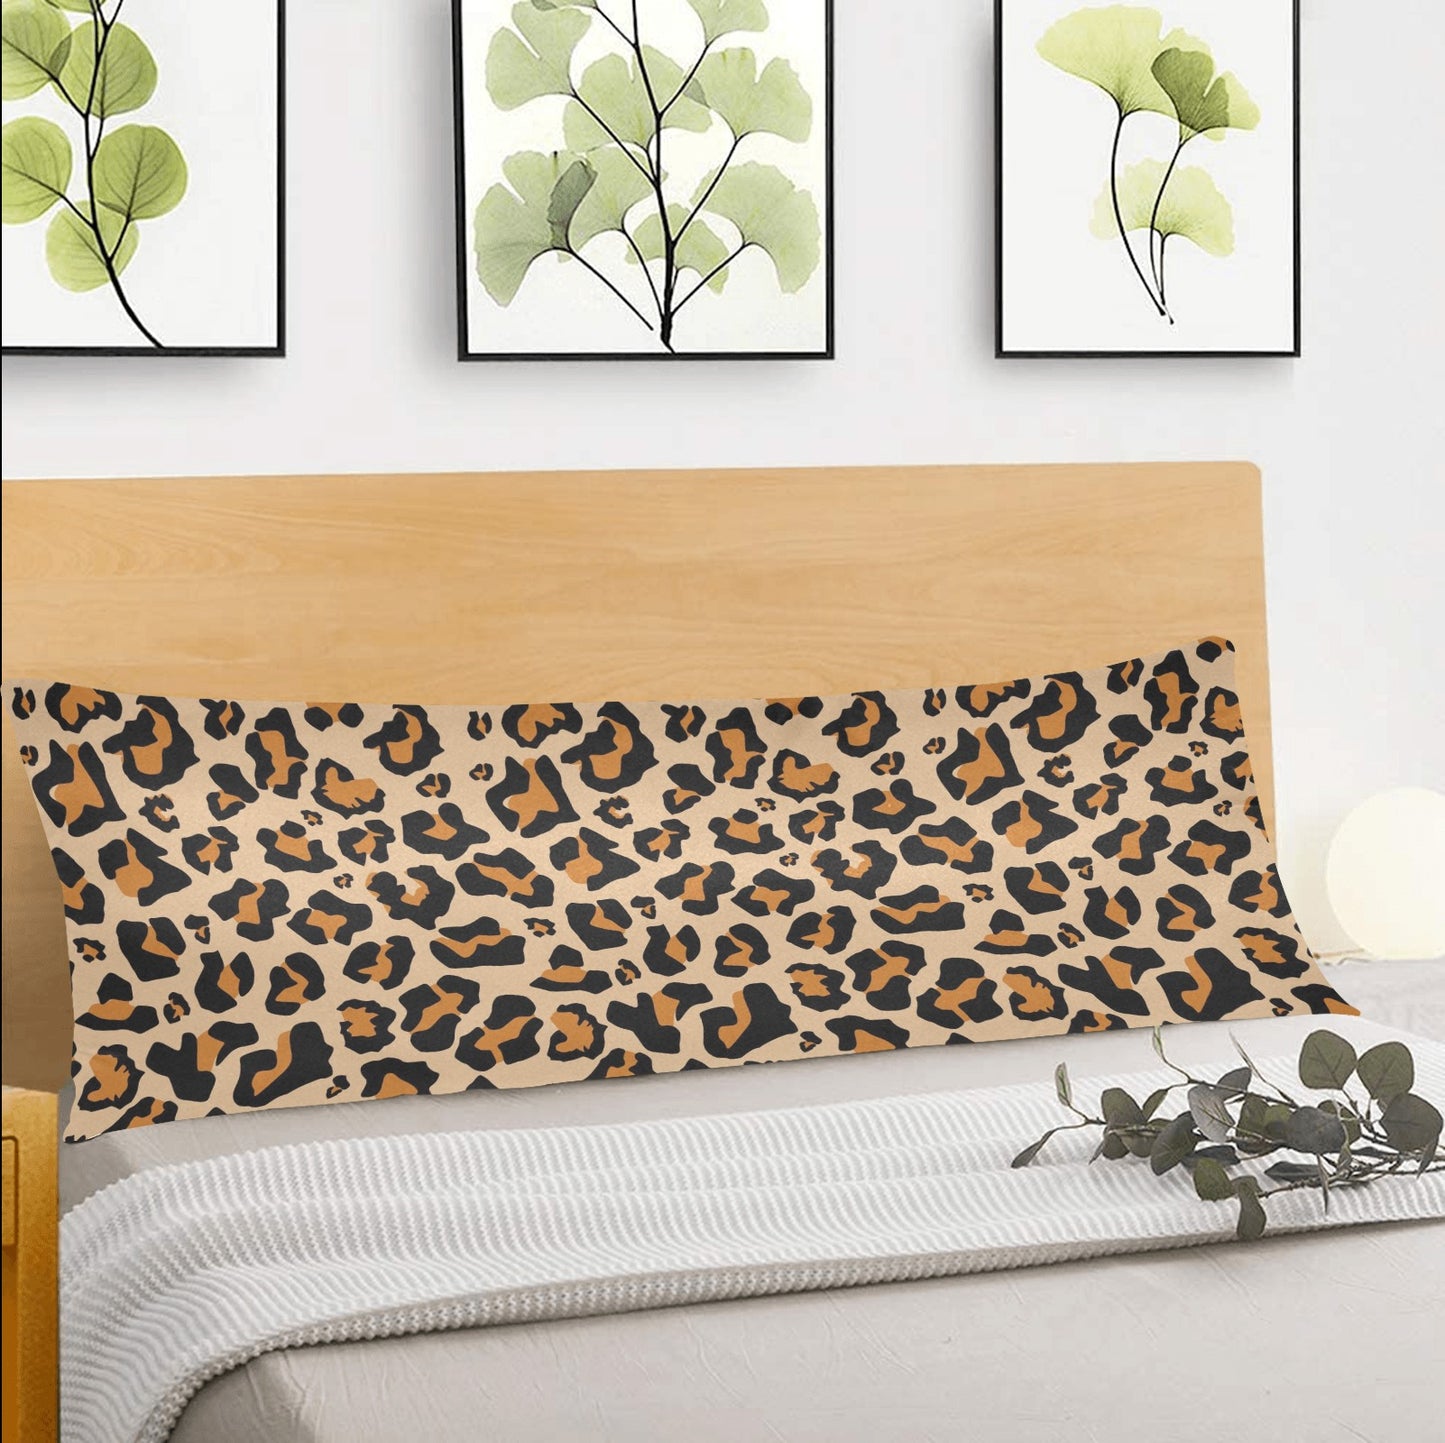 Leopard Body Pillow Case, Cheetah Animal Print Long Large Bed Accent Pillowcase Print Throw Decor Decorative Cover Starcove Fashion